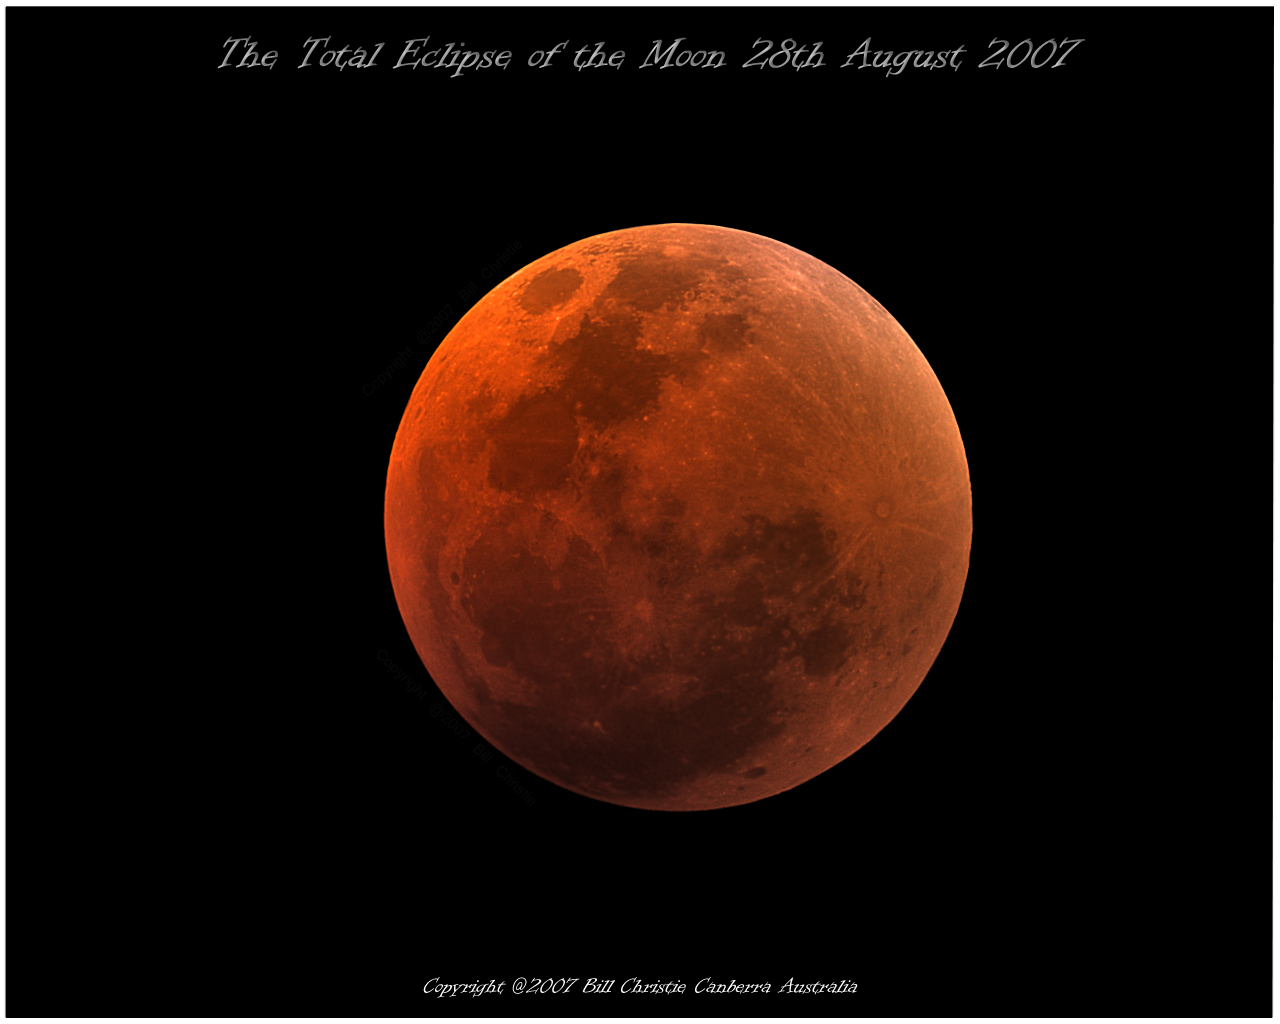 Gallery - the Great Eclipse of the Moon 2007